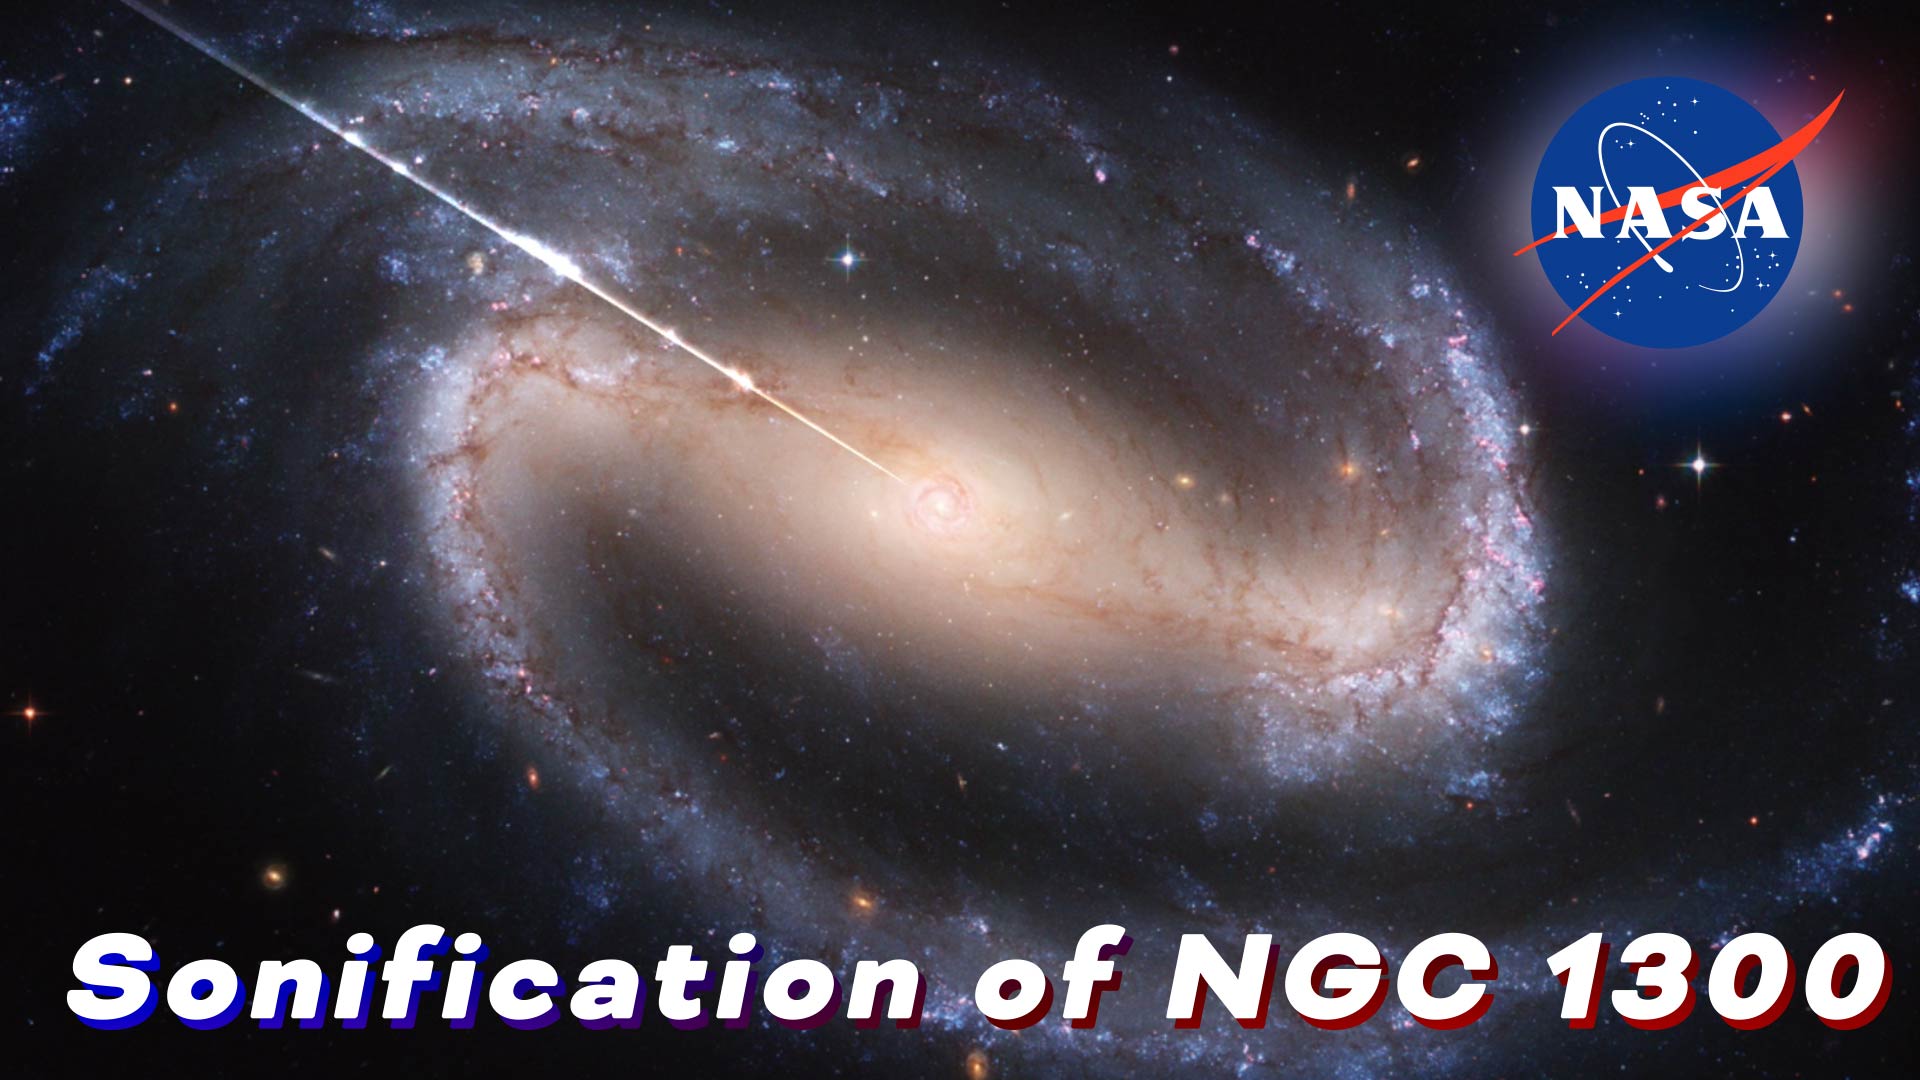 Preview Image for Sonification of NGC 1300